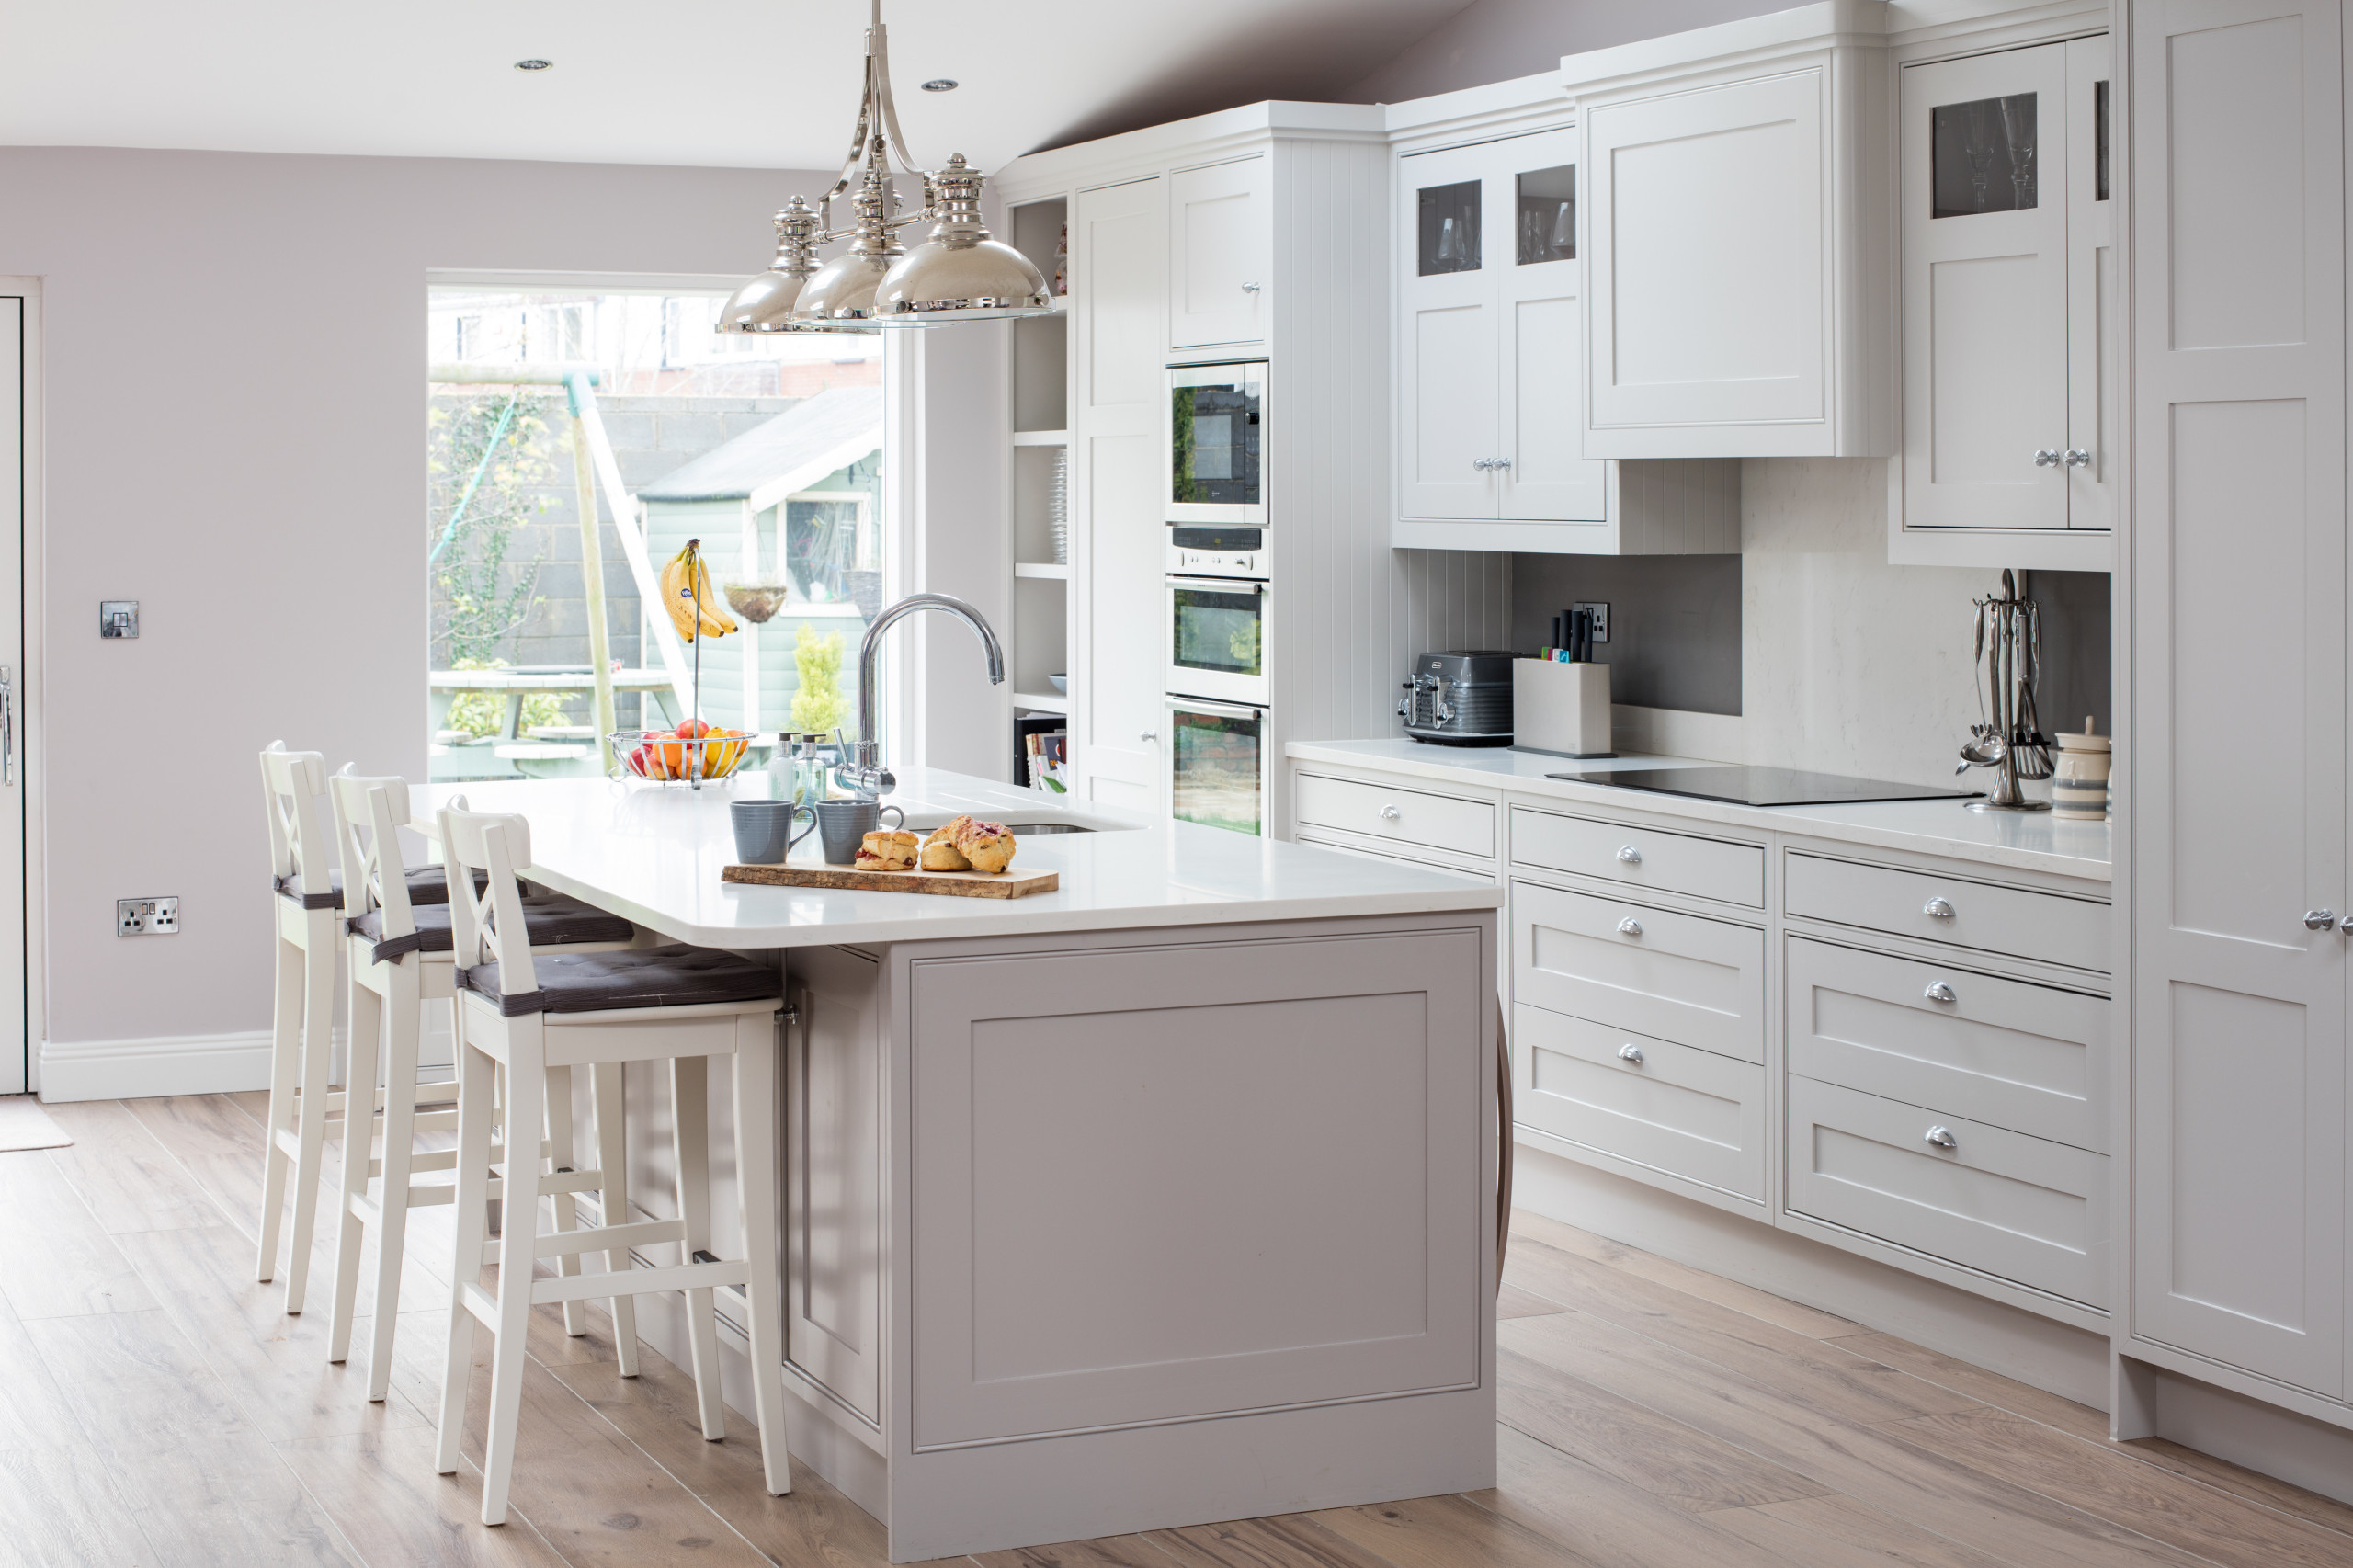 Jonathan Williams Solid Hand Painted Kitchen From Our Classic Collection Kitchen Dublin By Jonathan Williams Luxury Kitchens Houzz